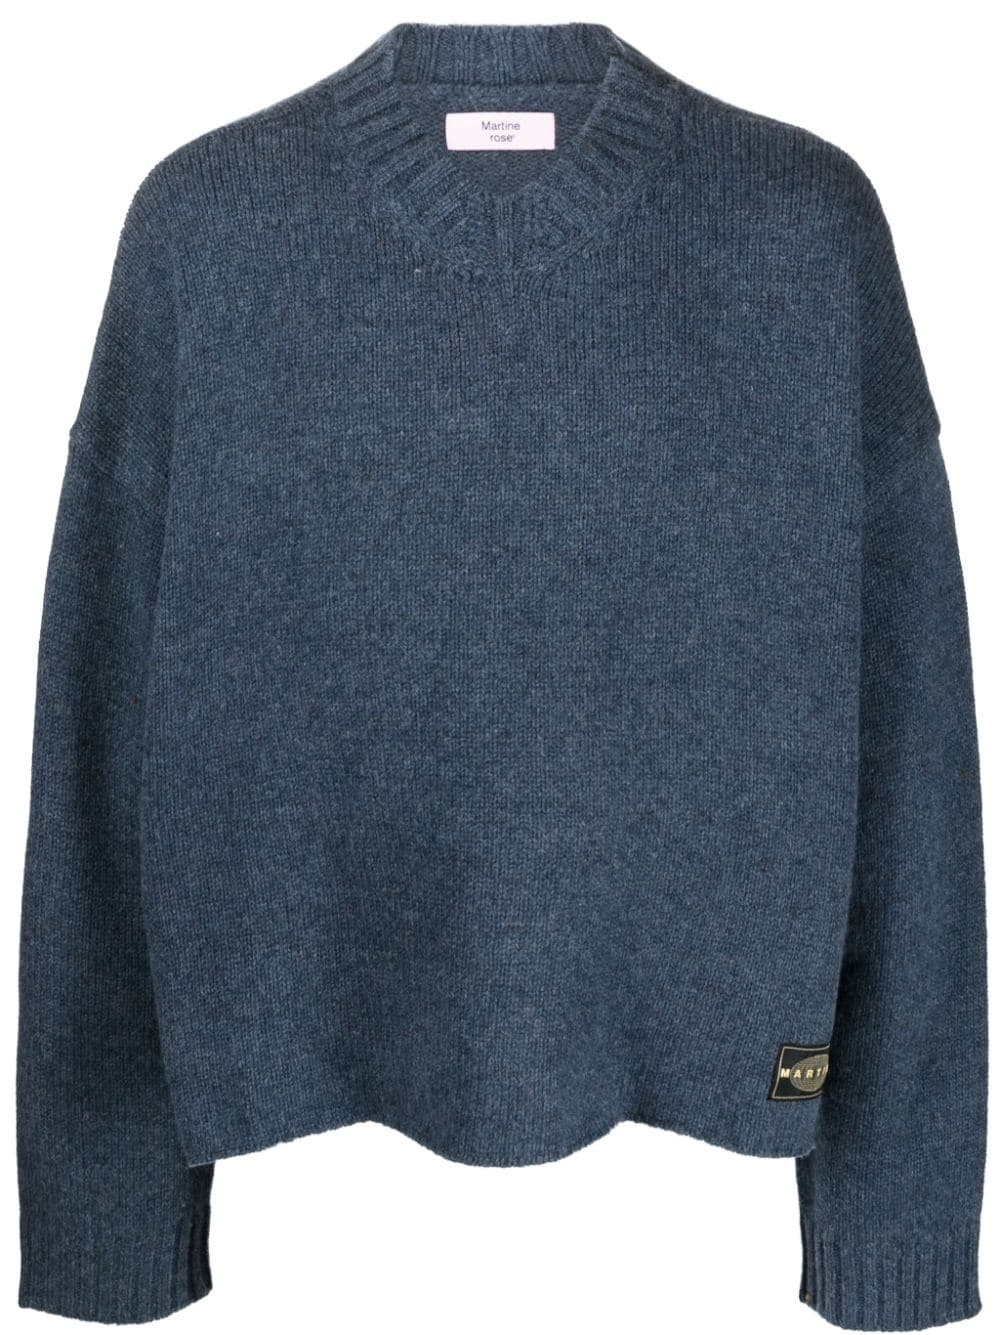 logo-patch knitted jumper - 1